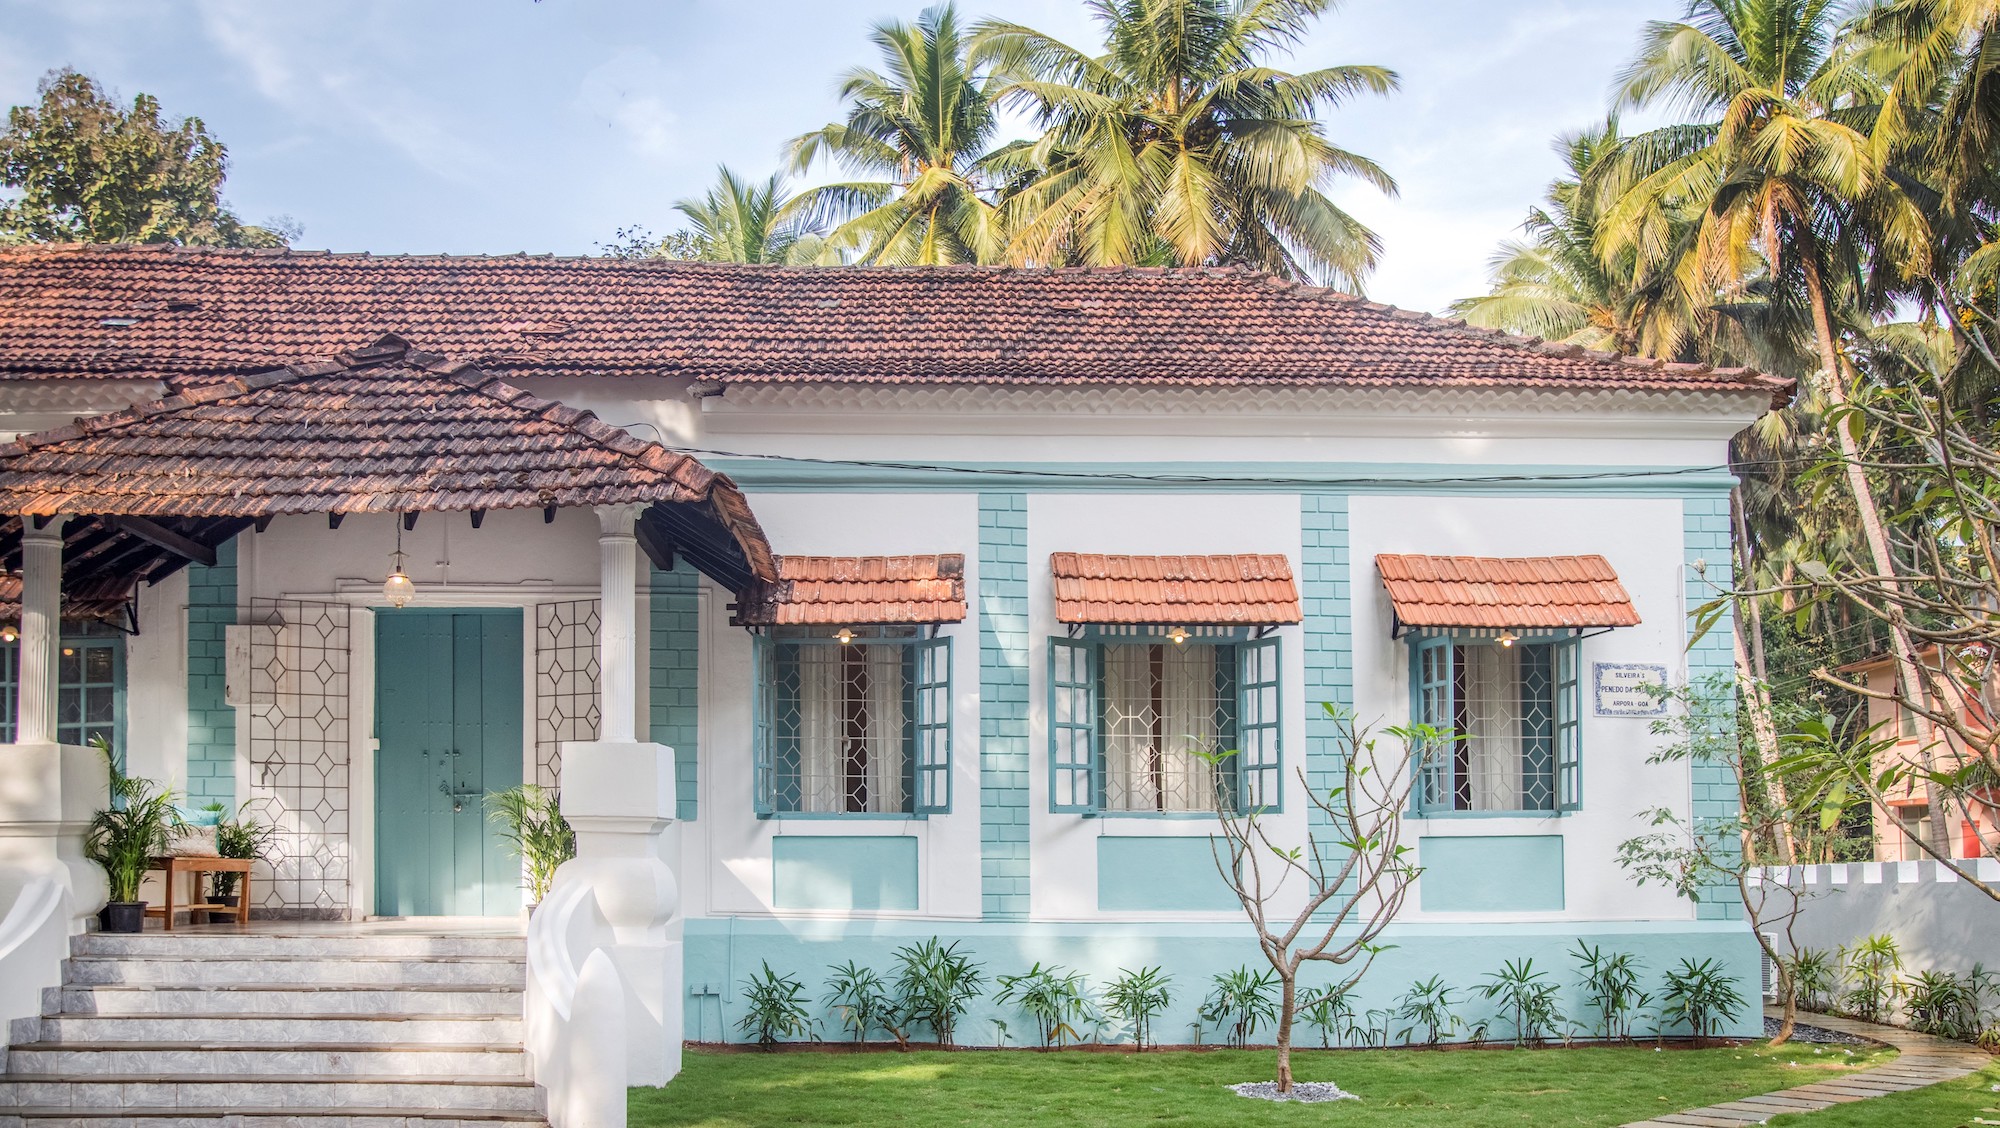 Villa Saudade by Rochelle Santimano, who carefully preserved the property's Goan architectural heritage - Effect Magazine